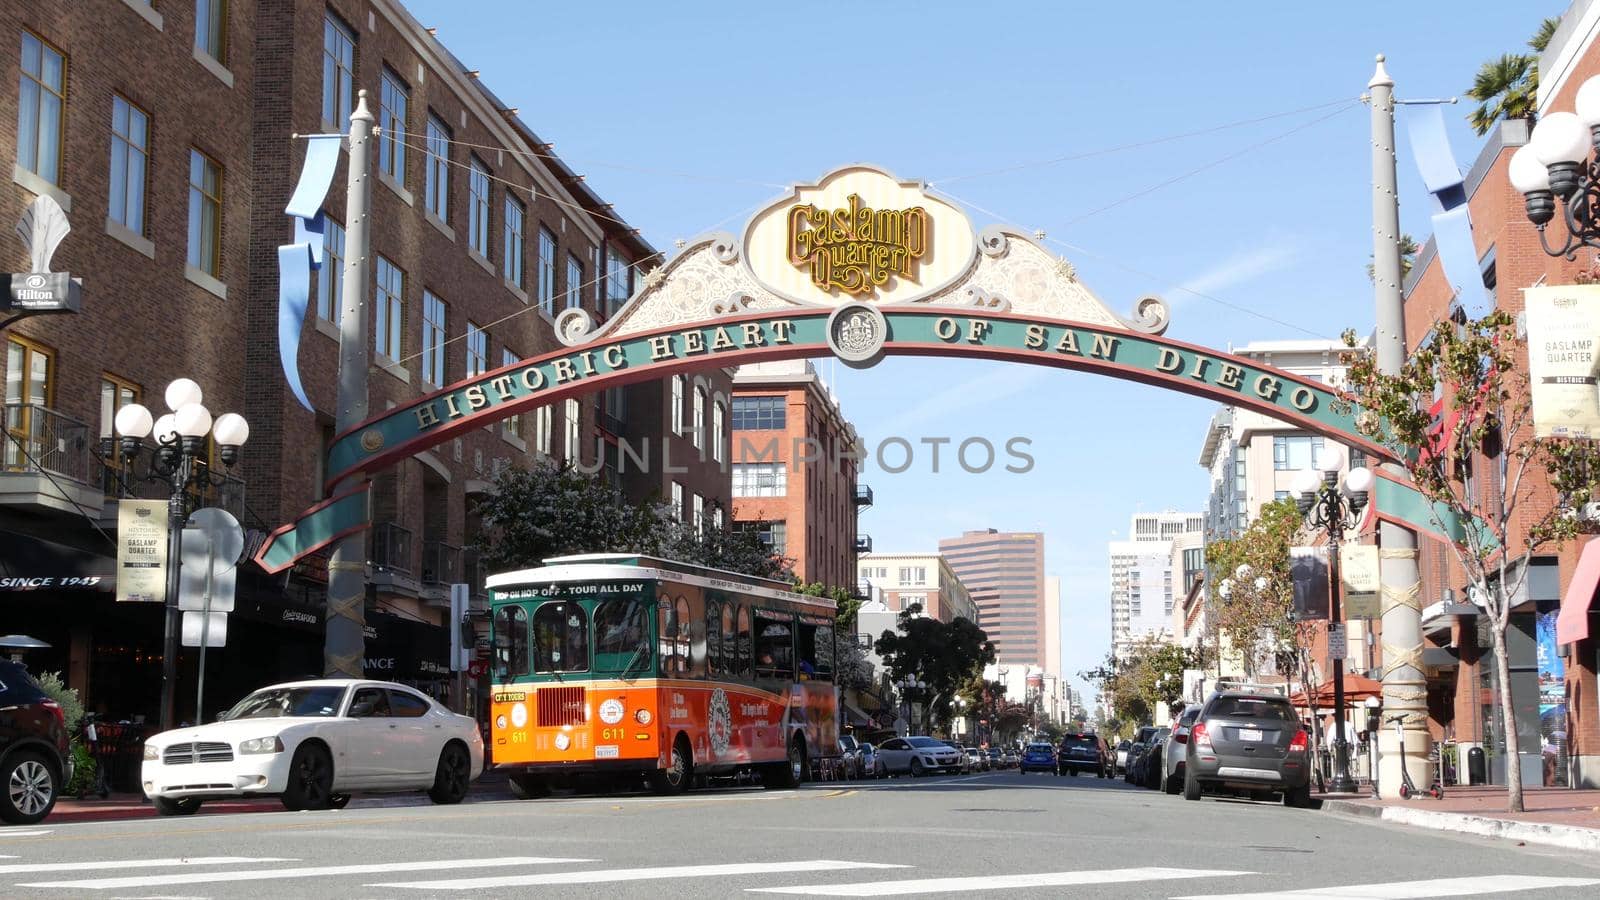 SAN DIEGO, CALIFORNIA USA - 13 FEB 2020: Gaslamp Quarter historic entrance arch sign on 5th avenue. Orange iconic retro trolley, hop-on hop-off bus and tourist landmark, Old Town Sightseeing Tour by DogoraSun